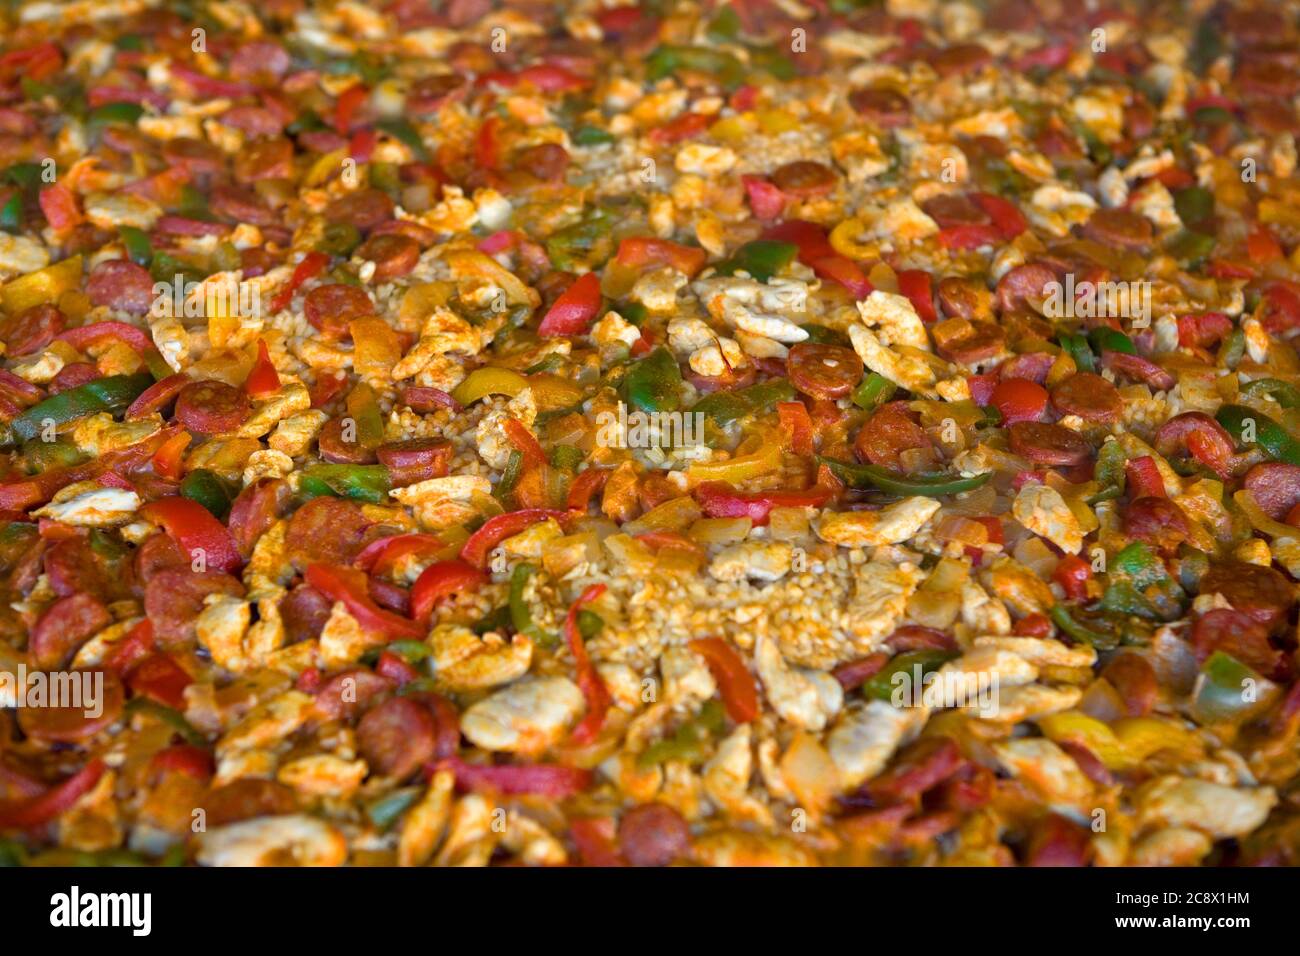 Paella cooking, Chili Fiesta, West Dean, West Sussex, England, UK Stock Photo